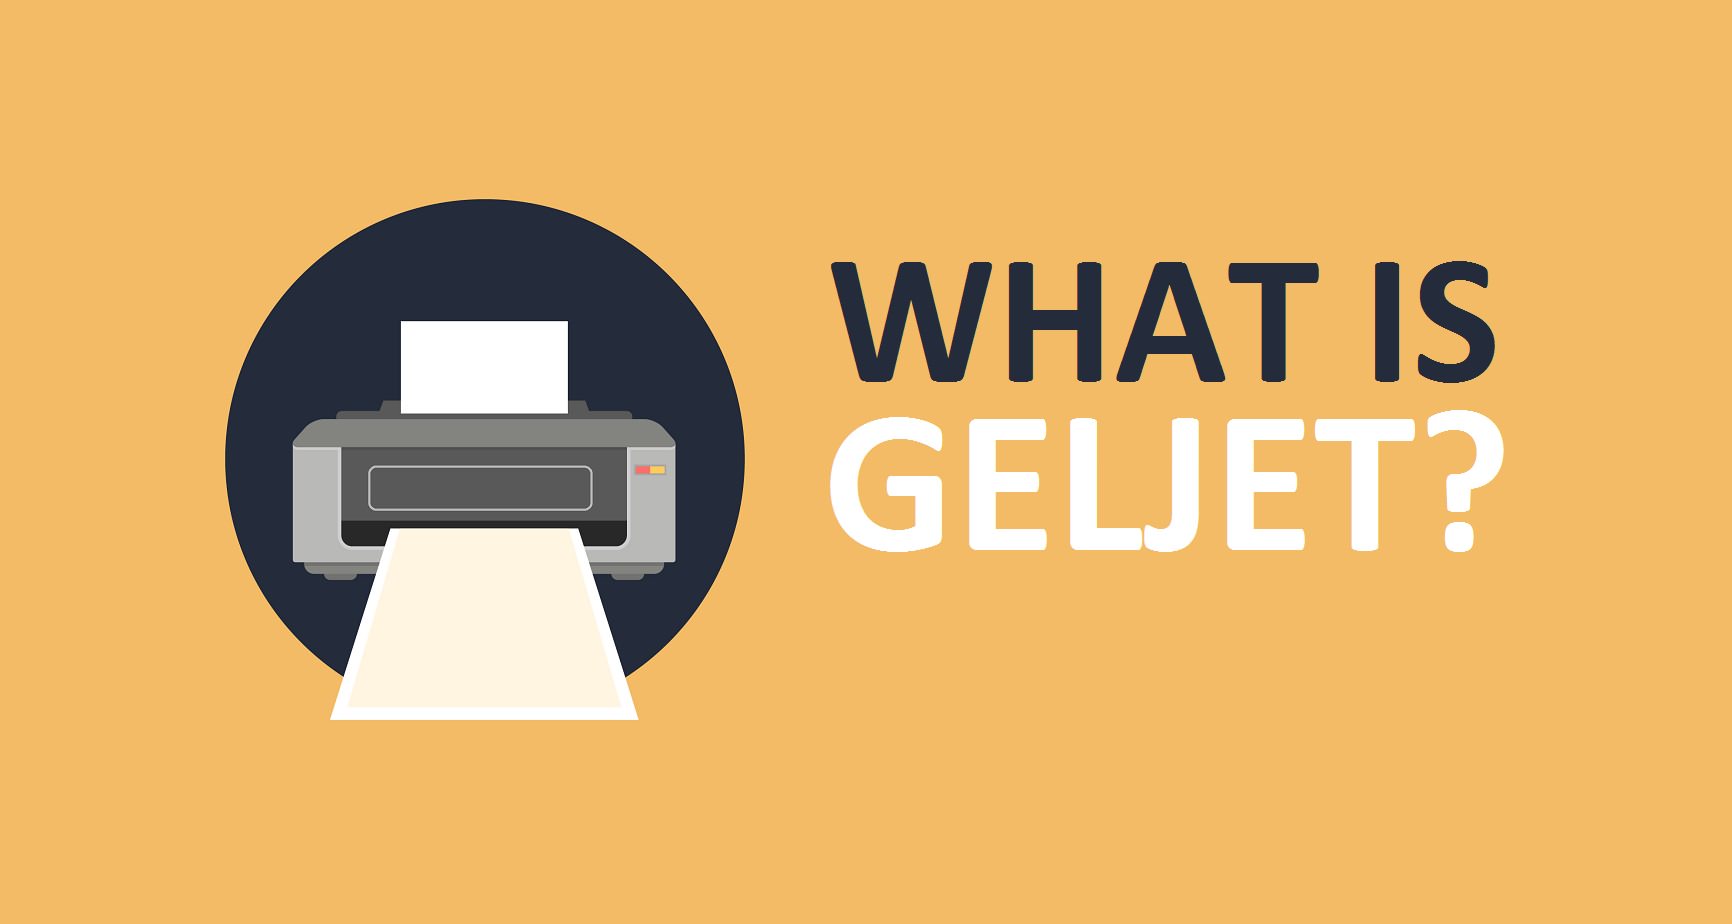 What is geljet title